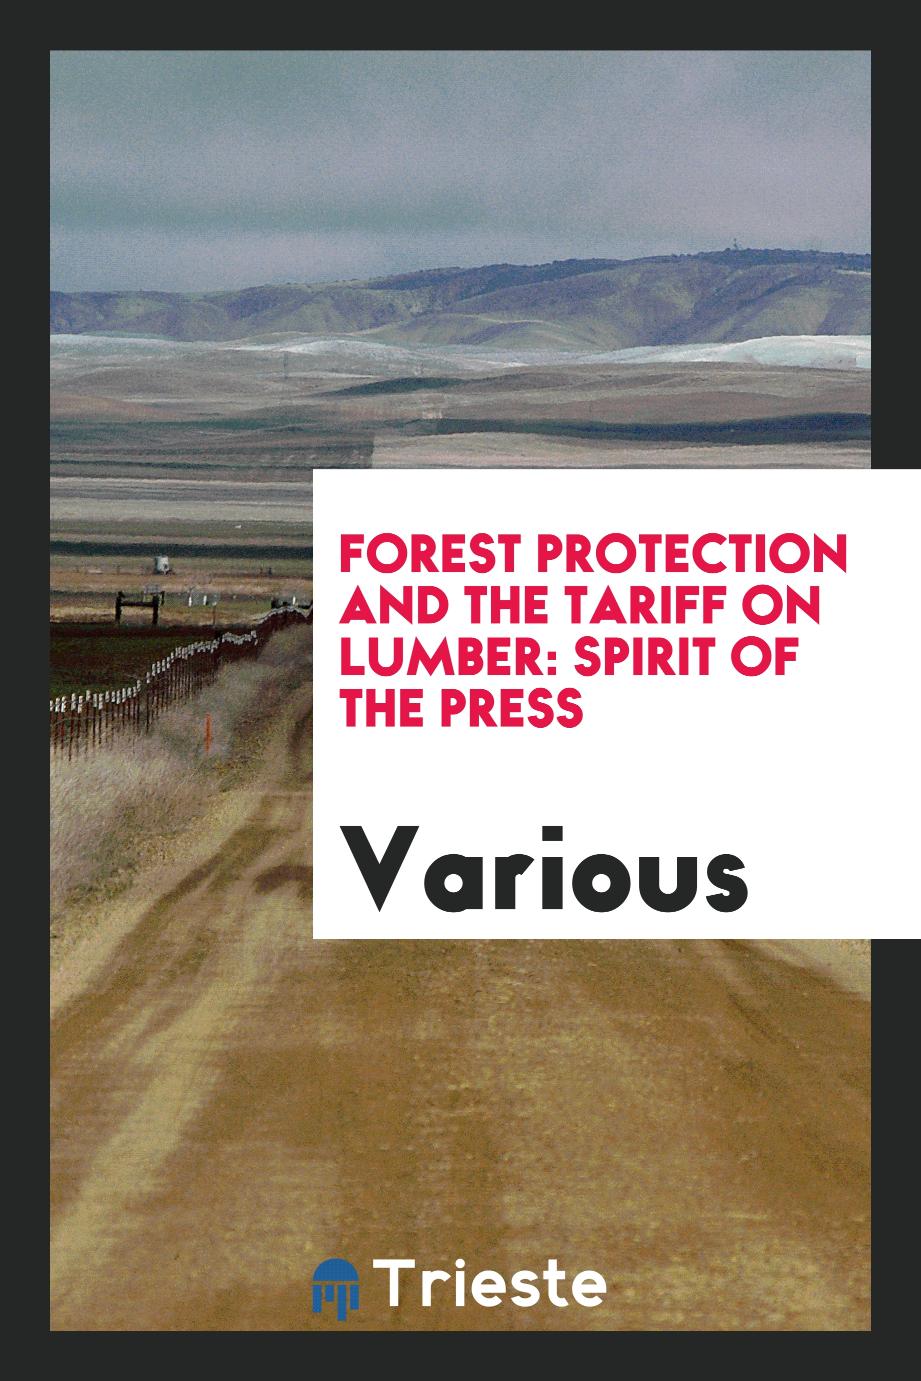 Forest Protection and the Tariff on Lumber: Spirit of the Press